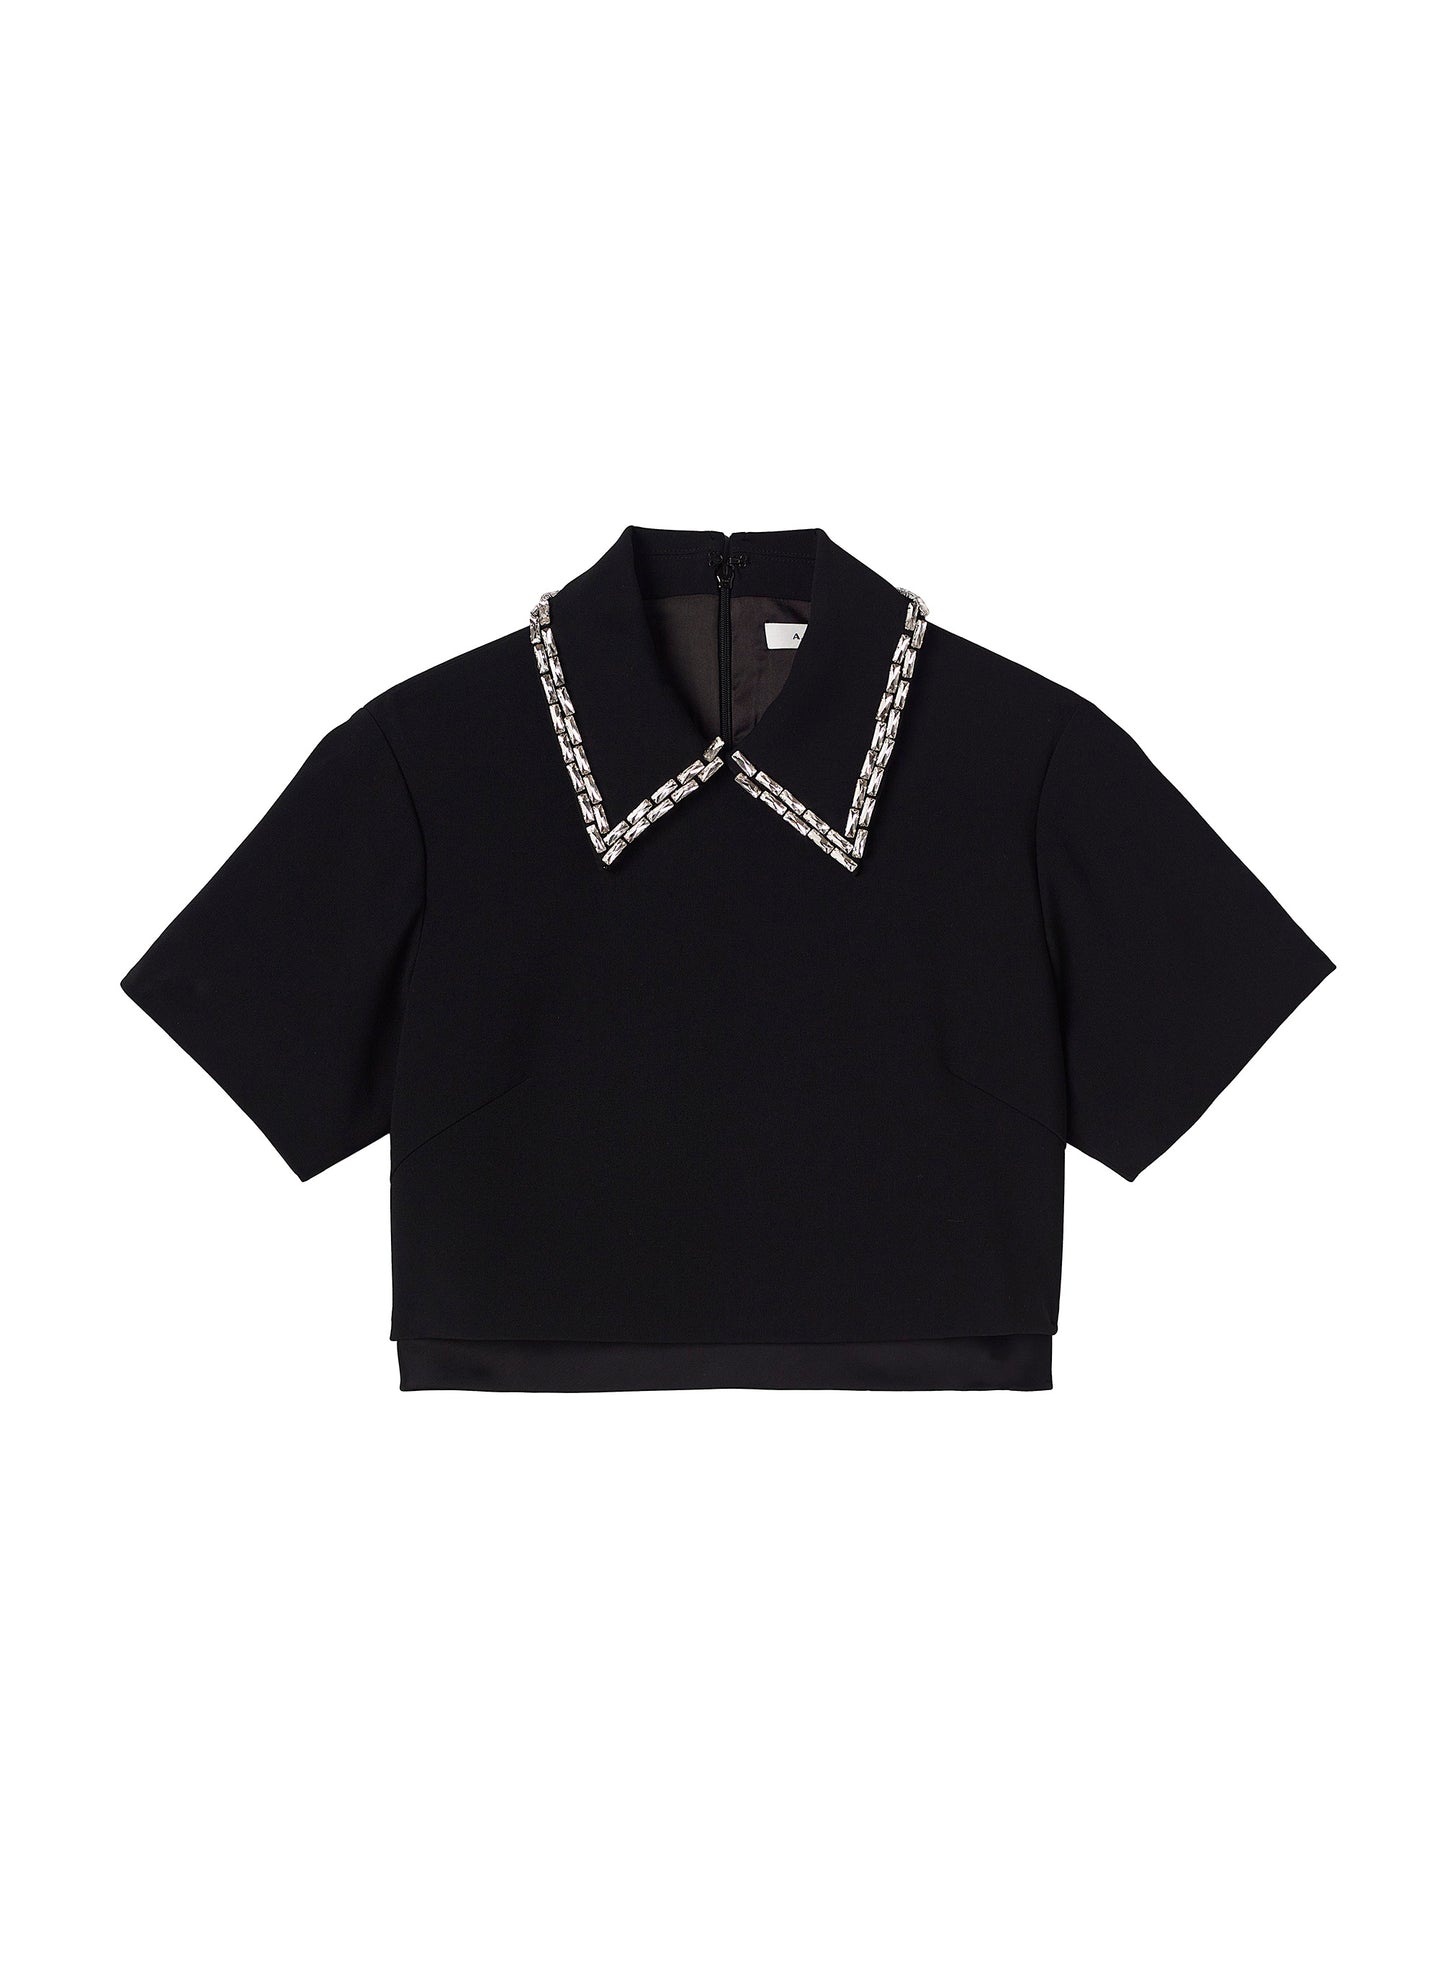 flatlay of black short sleeve collared top with crystal detailing 